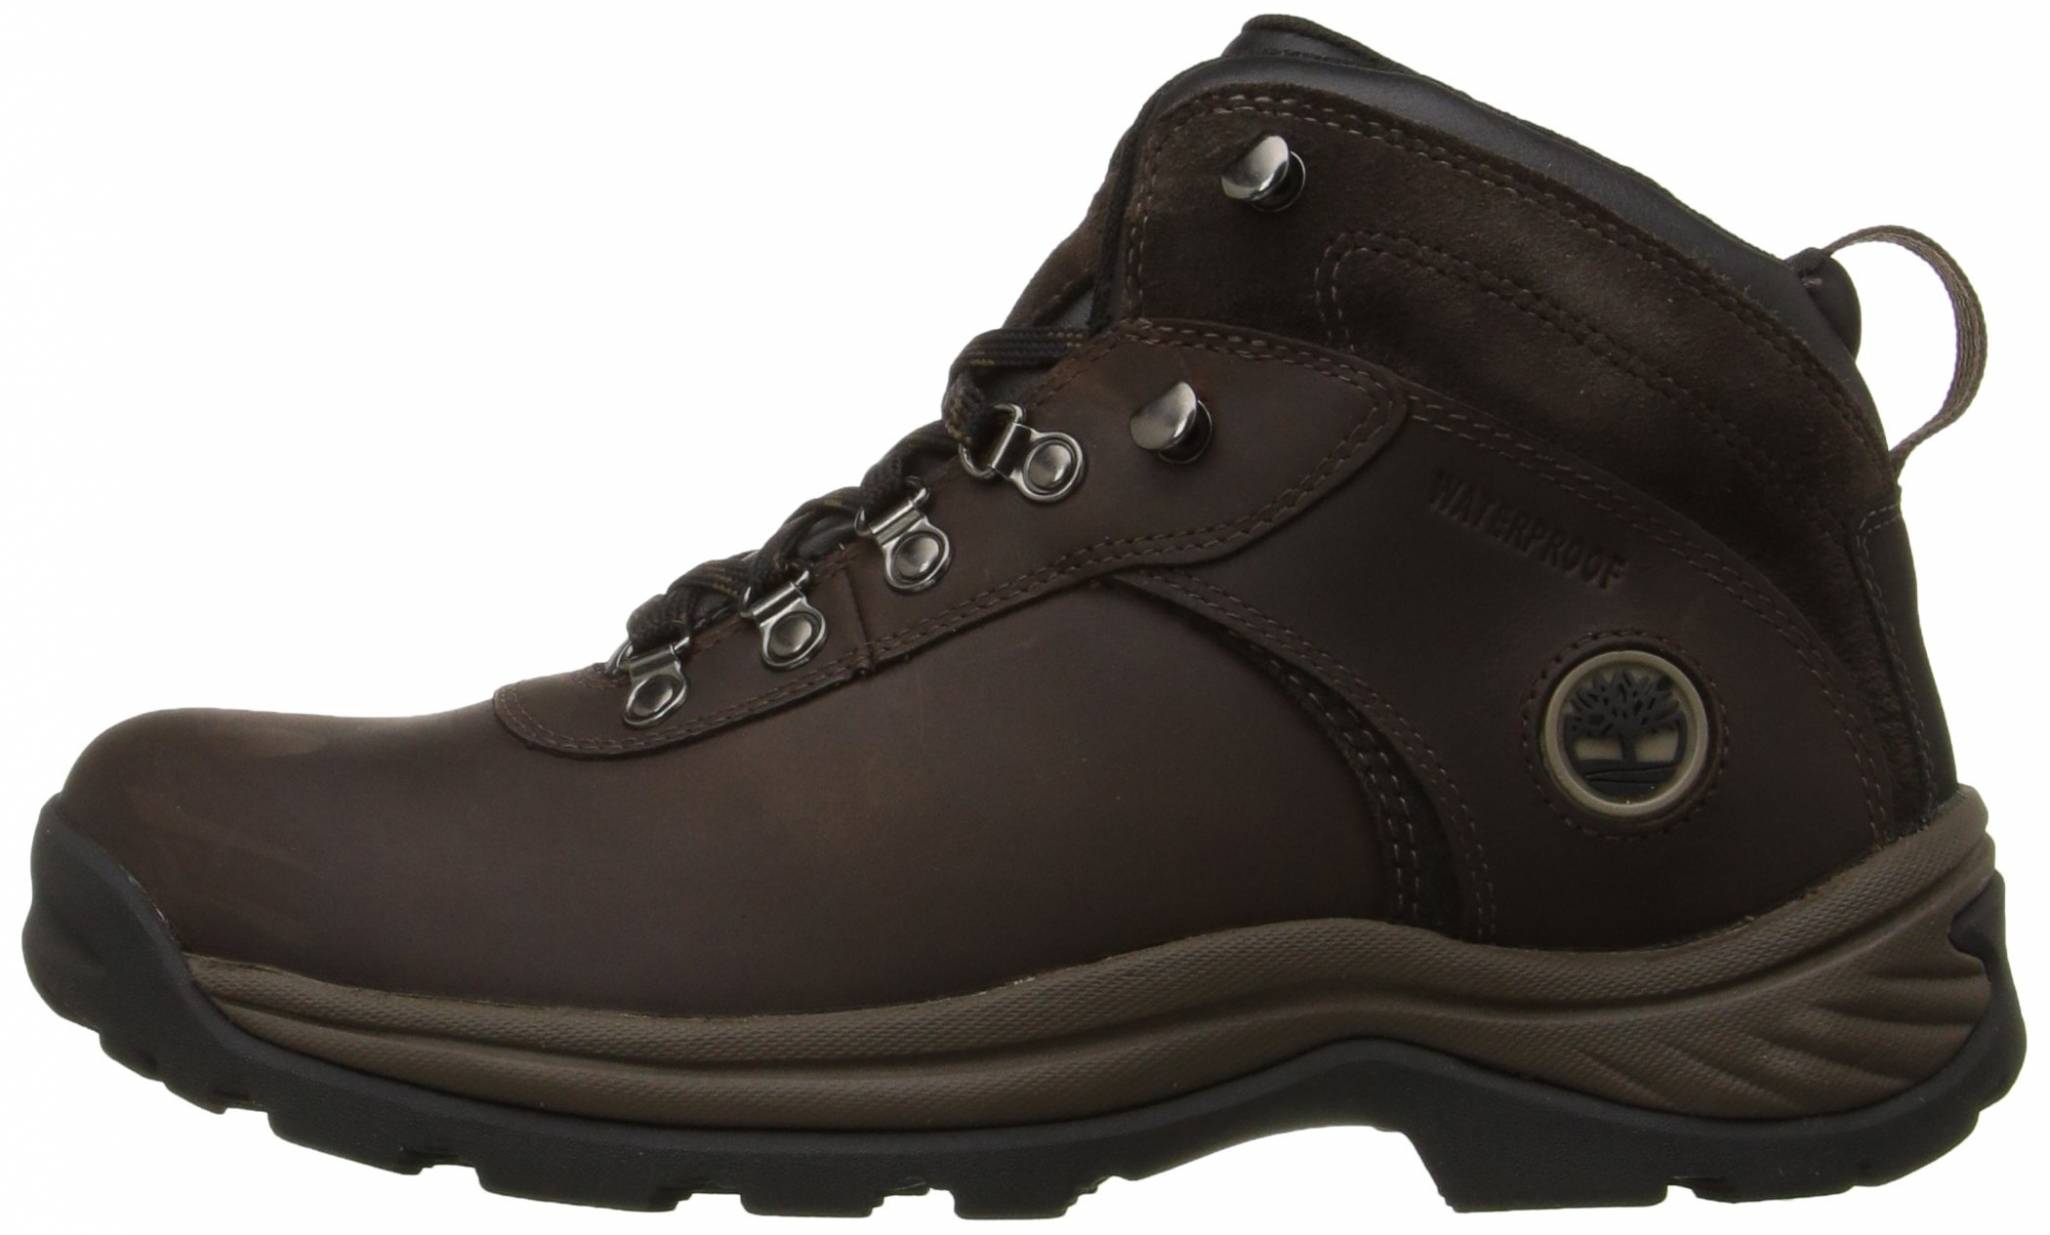 timberland trail boots